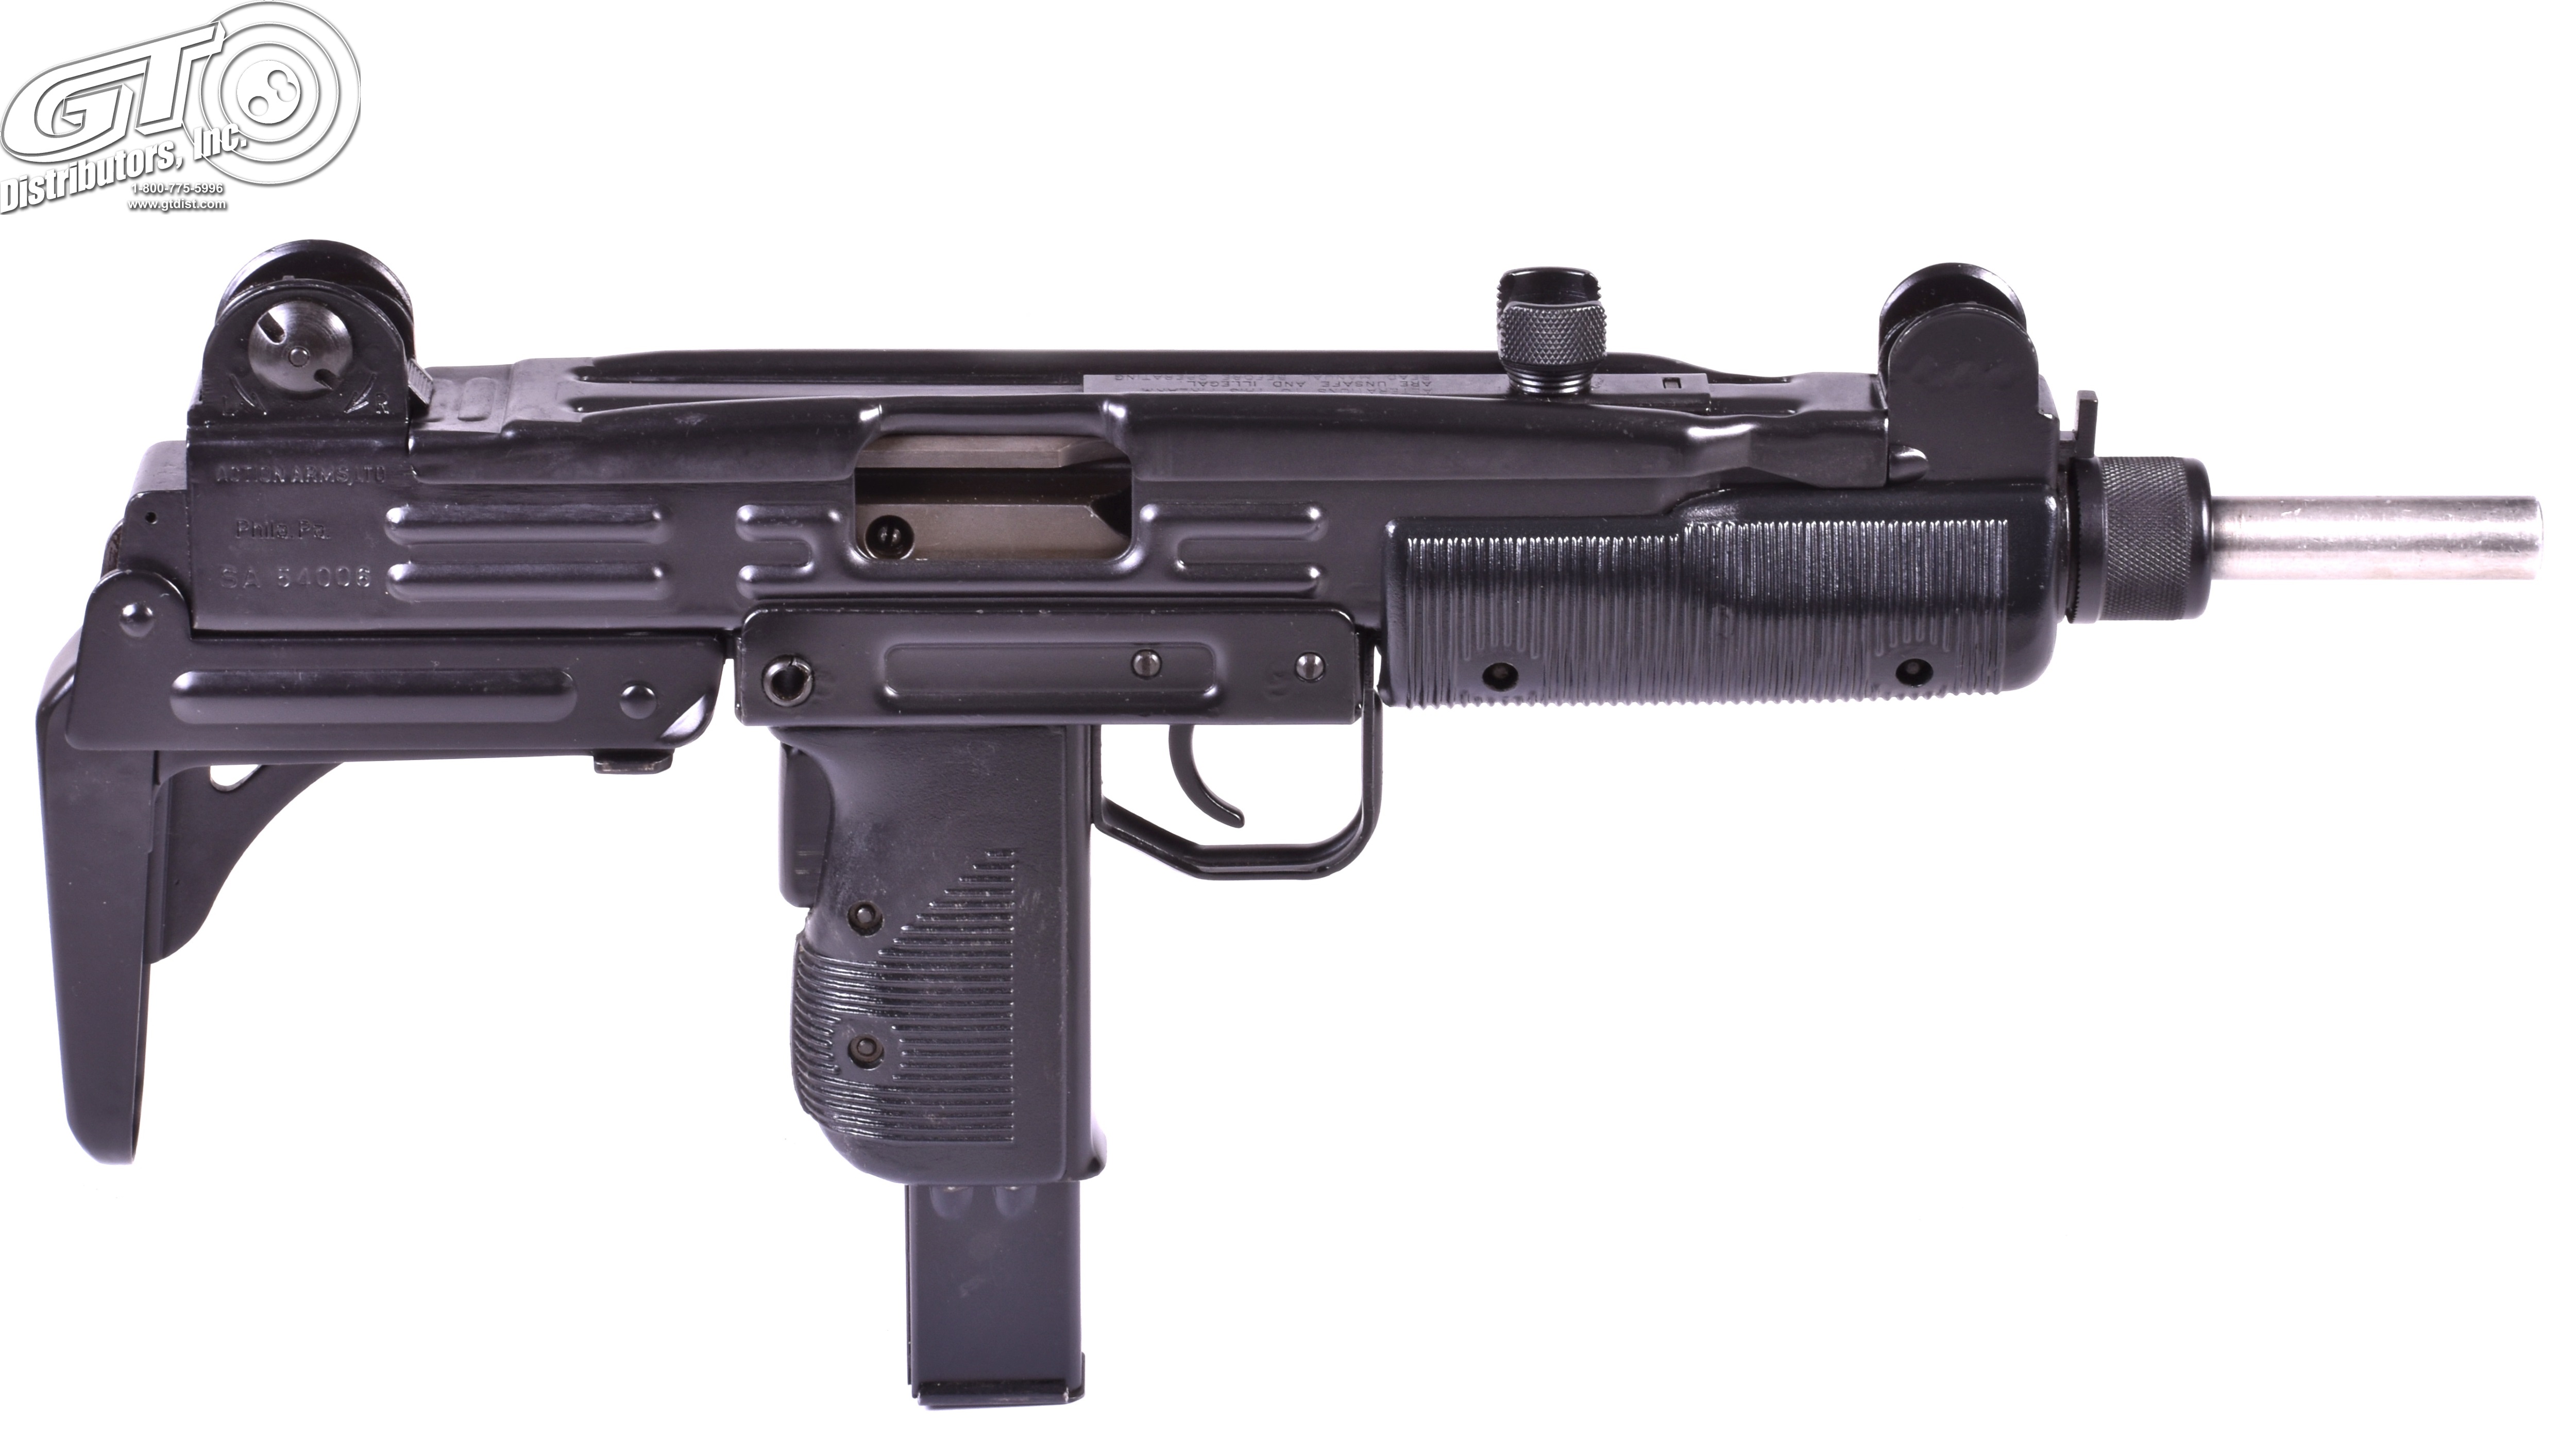 Action arms uzi serial numbers